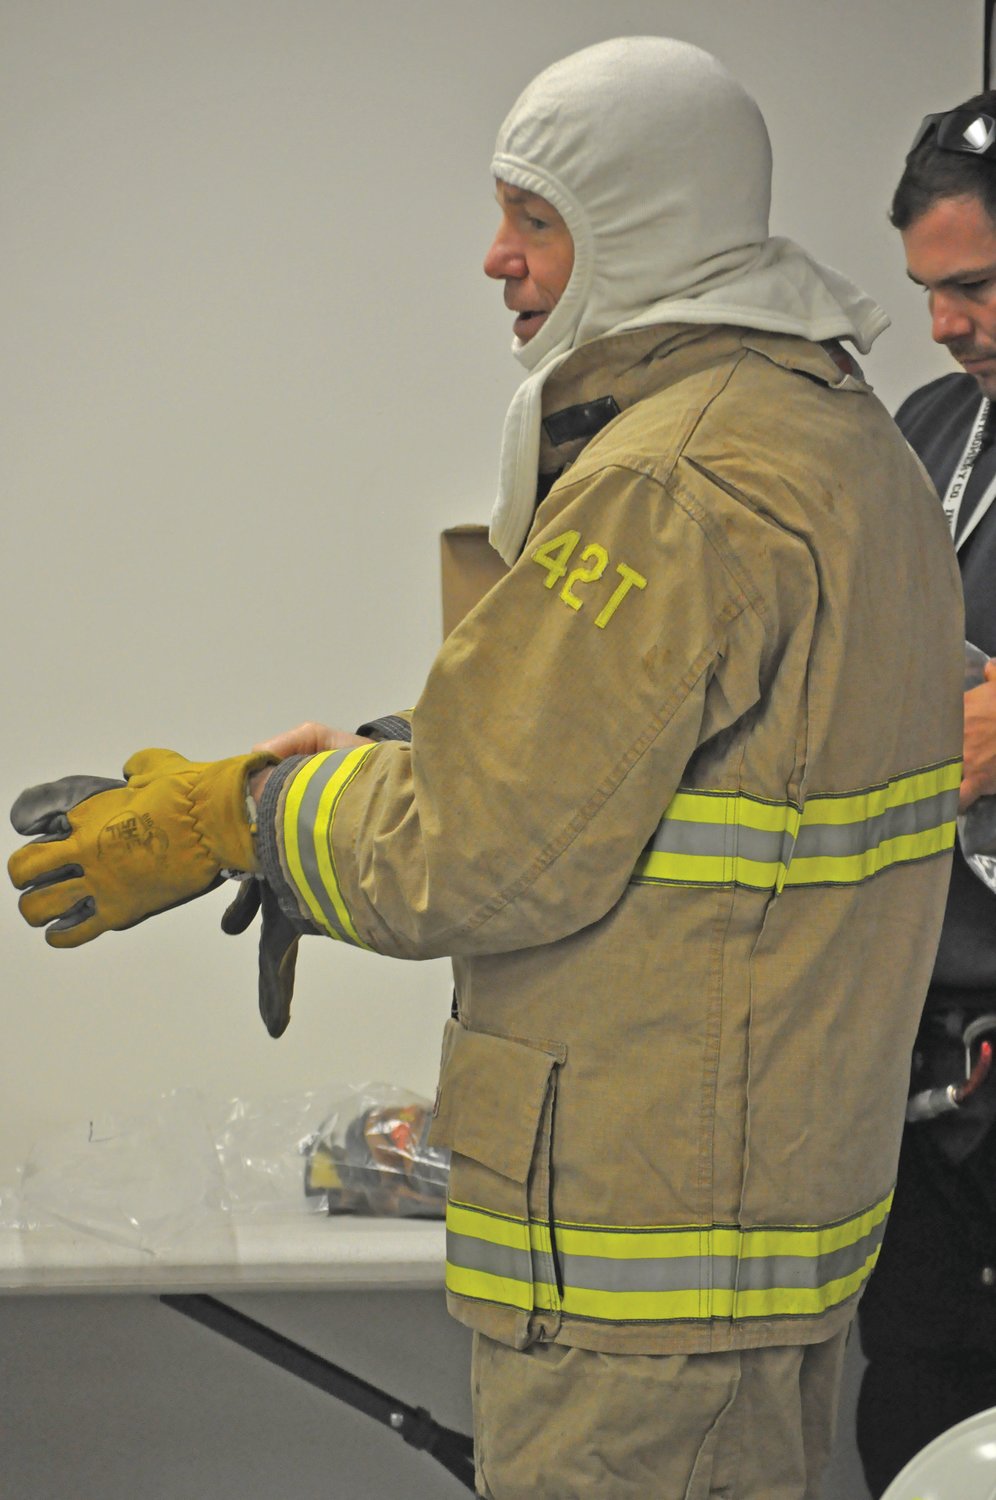 Crawfordsville City Councilman Ethan Hollander suits up for Fire Ops 101 on Saturday at the Public Safety Building on Elmore Street. The event sought to give elected and appointed officials a hands-on look at responding to fires and other emergencies.